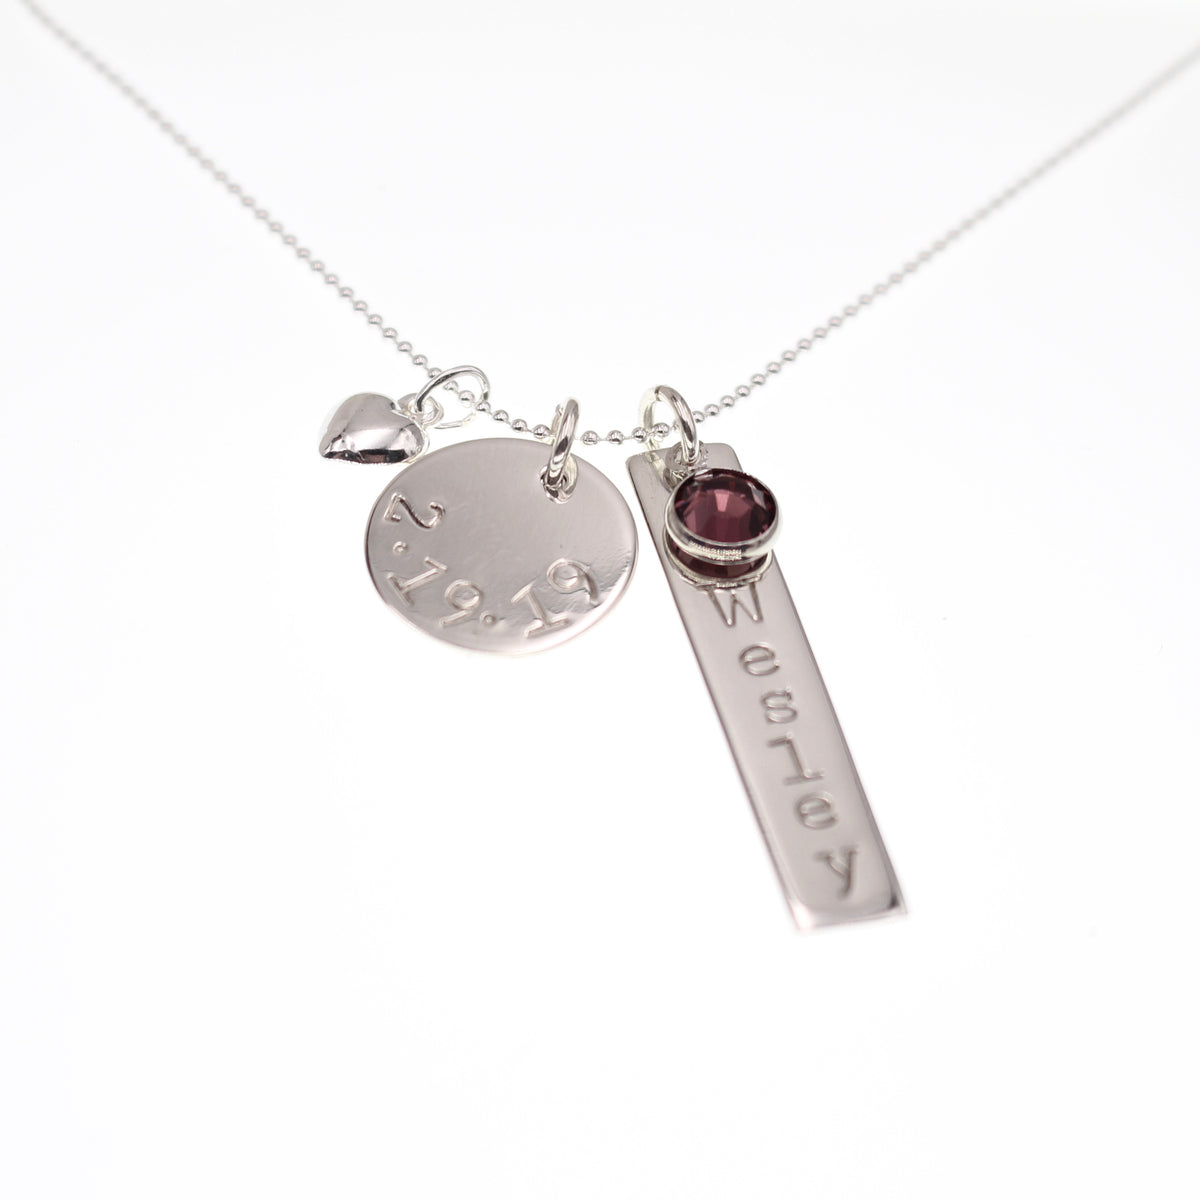 Disc &amp; Tag Personalized Necklace - Sterling Silver - Love It Personalized